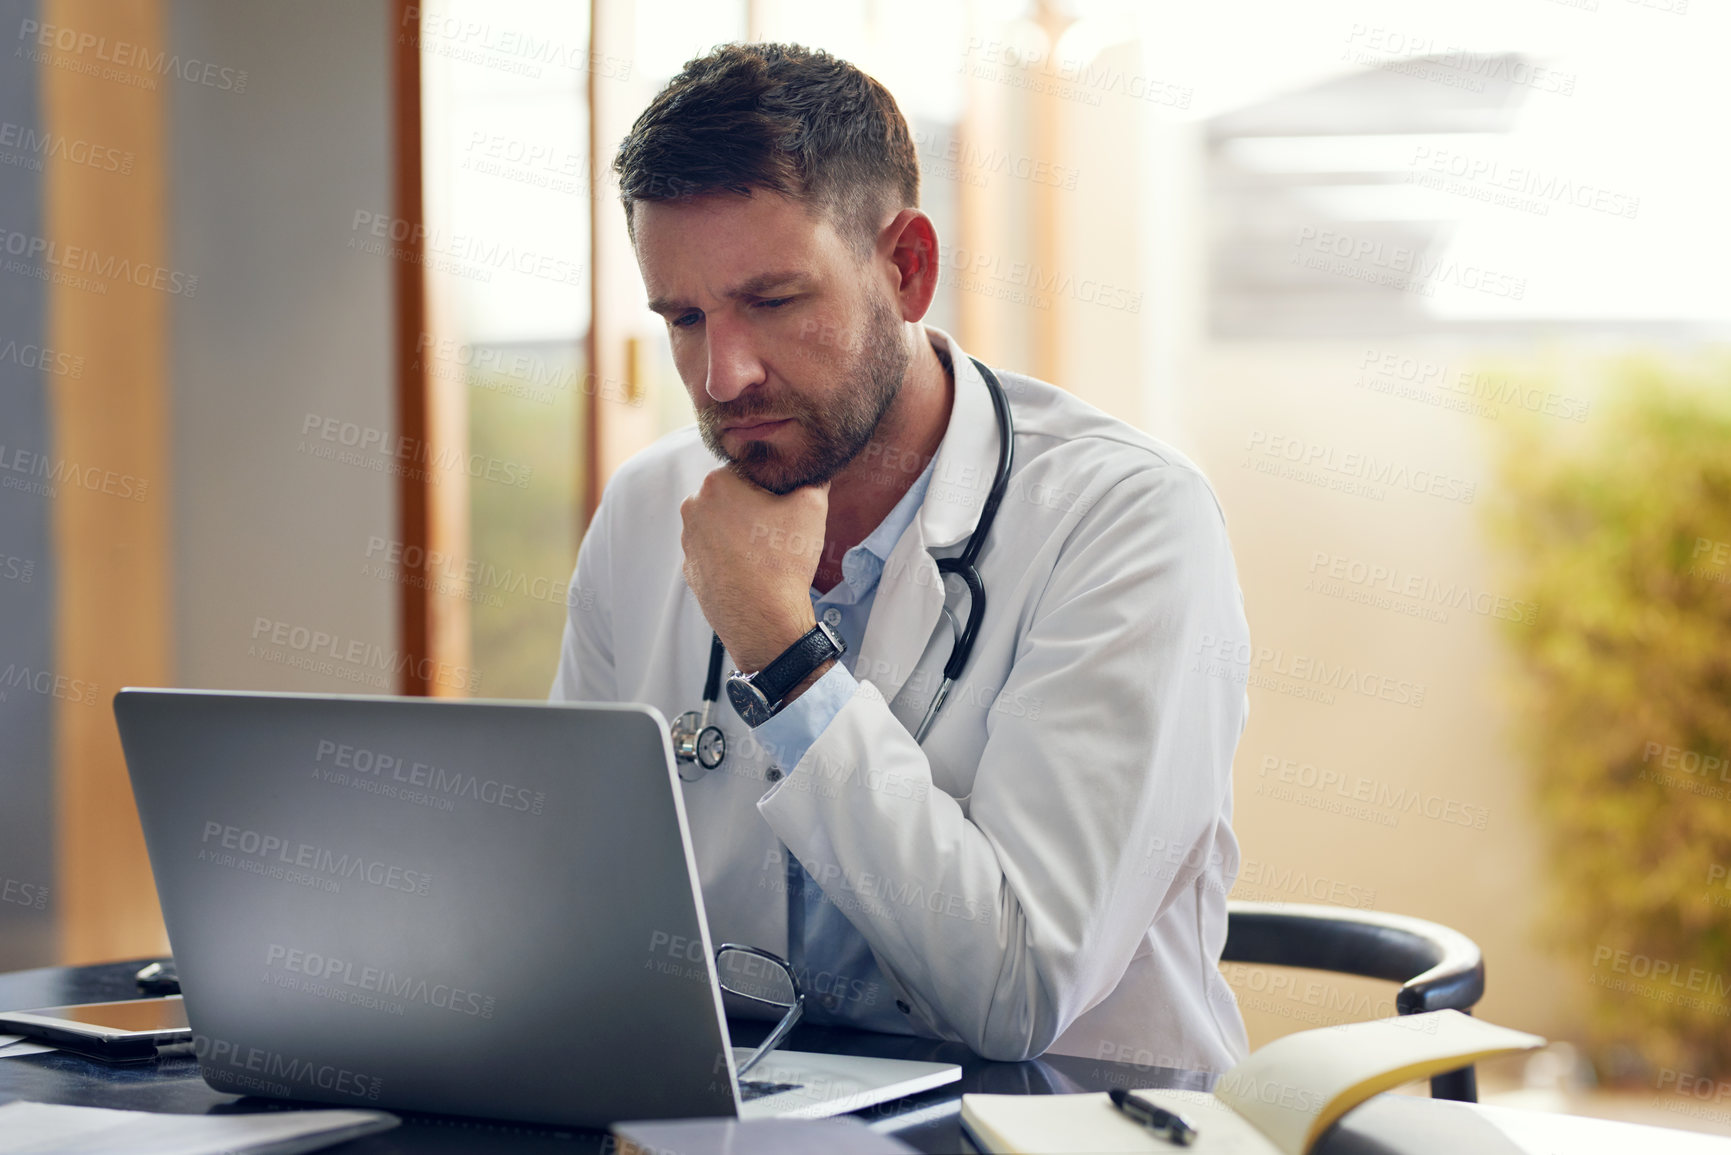 Buy stock photo Cropped shot of a handsome male doctor working on his laptop while sitting in his office